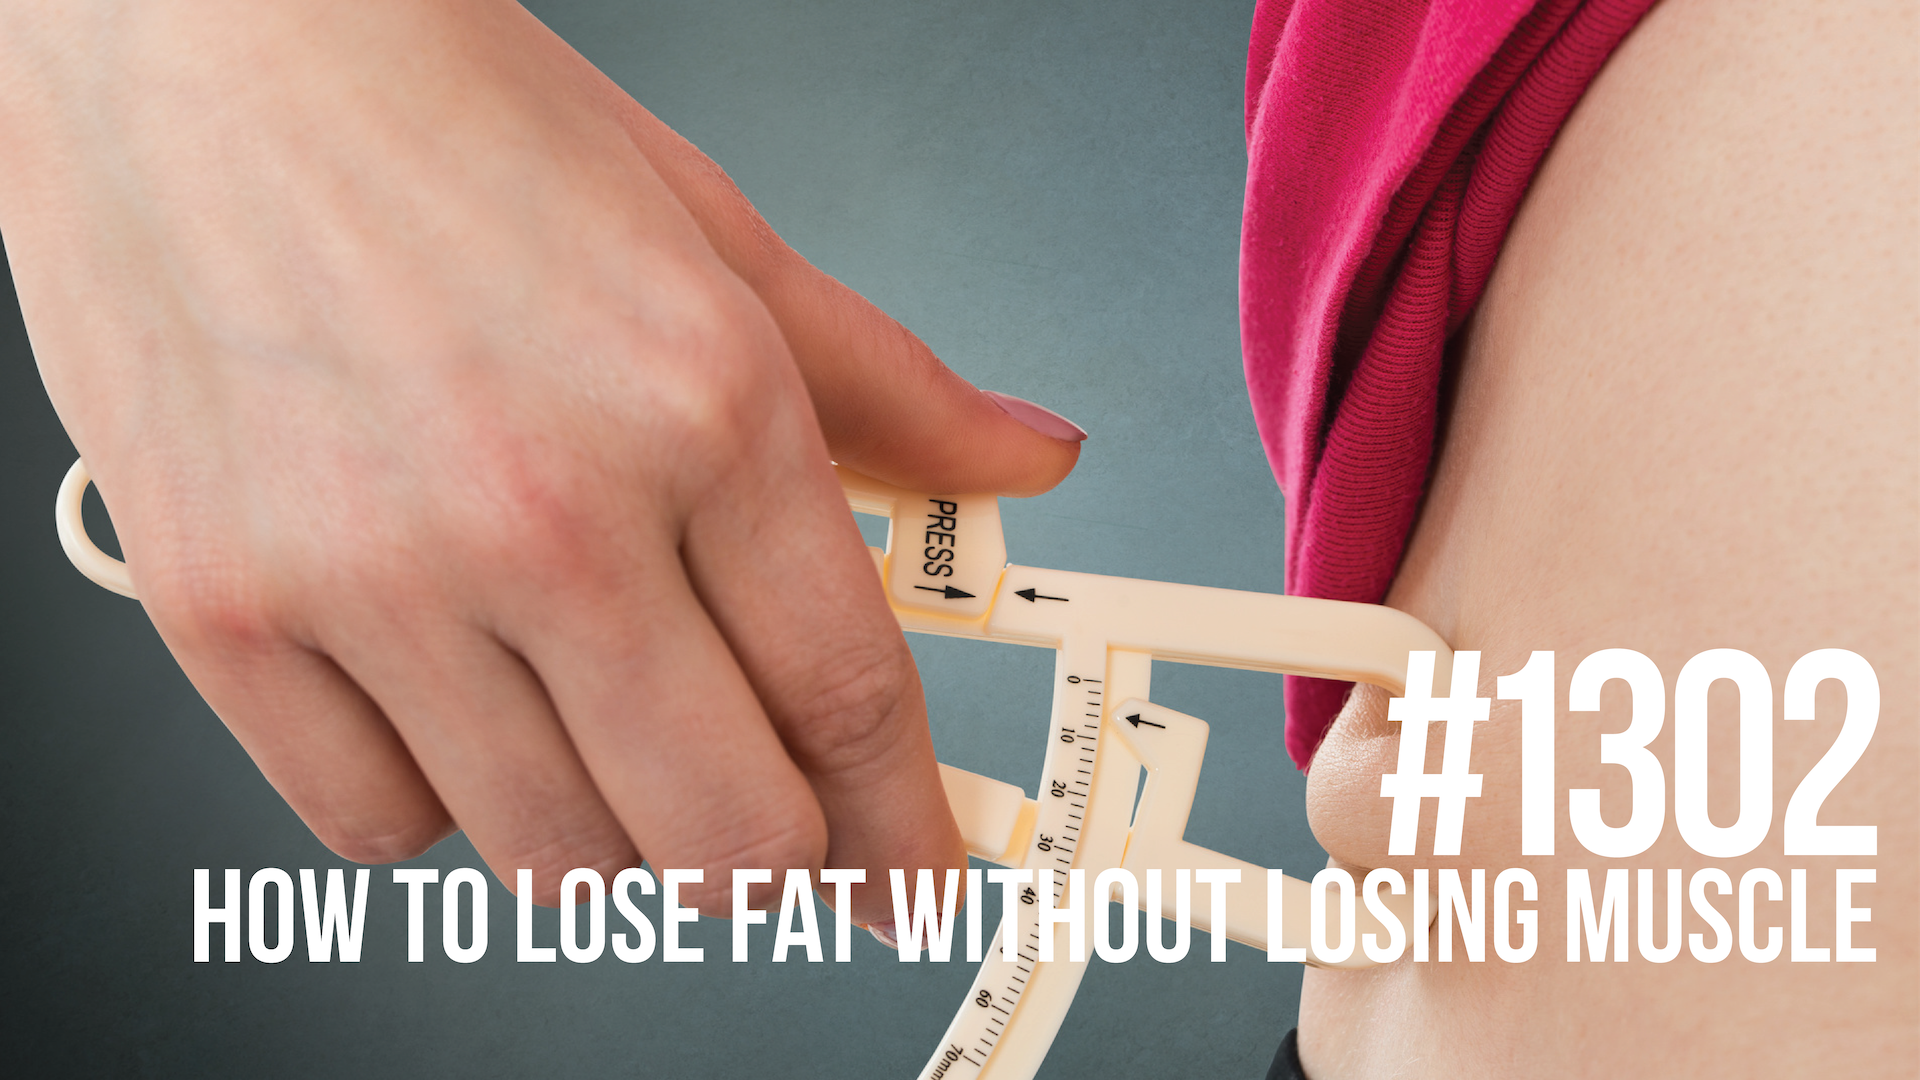 1302: How to Lose Fat Without Losing Muscle